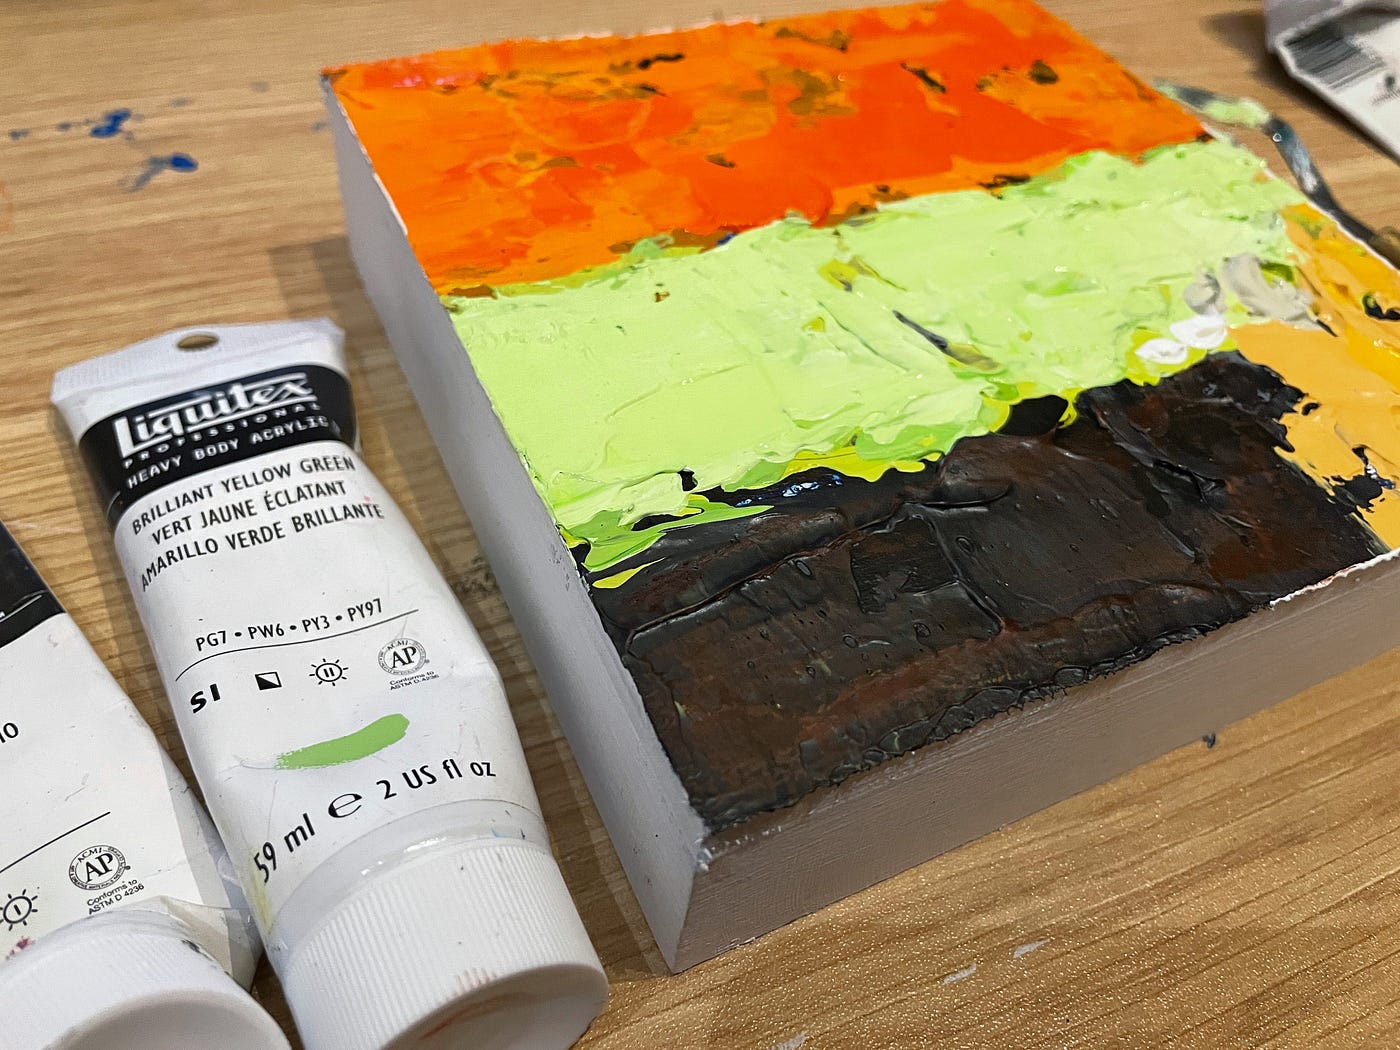 Archival artist panels for artists. Painting on archival wood art